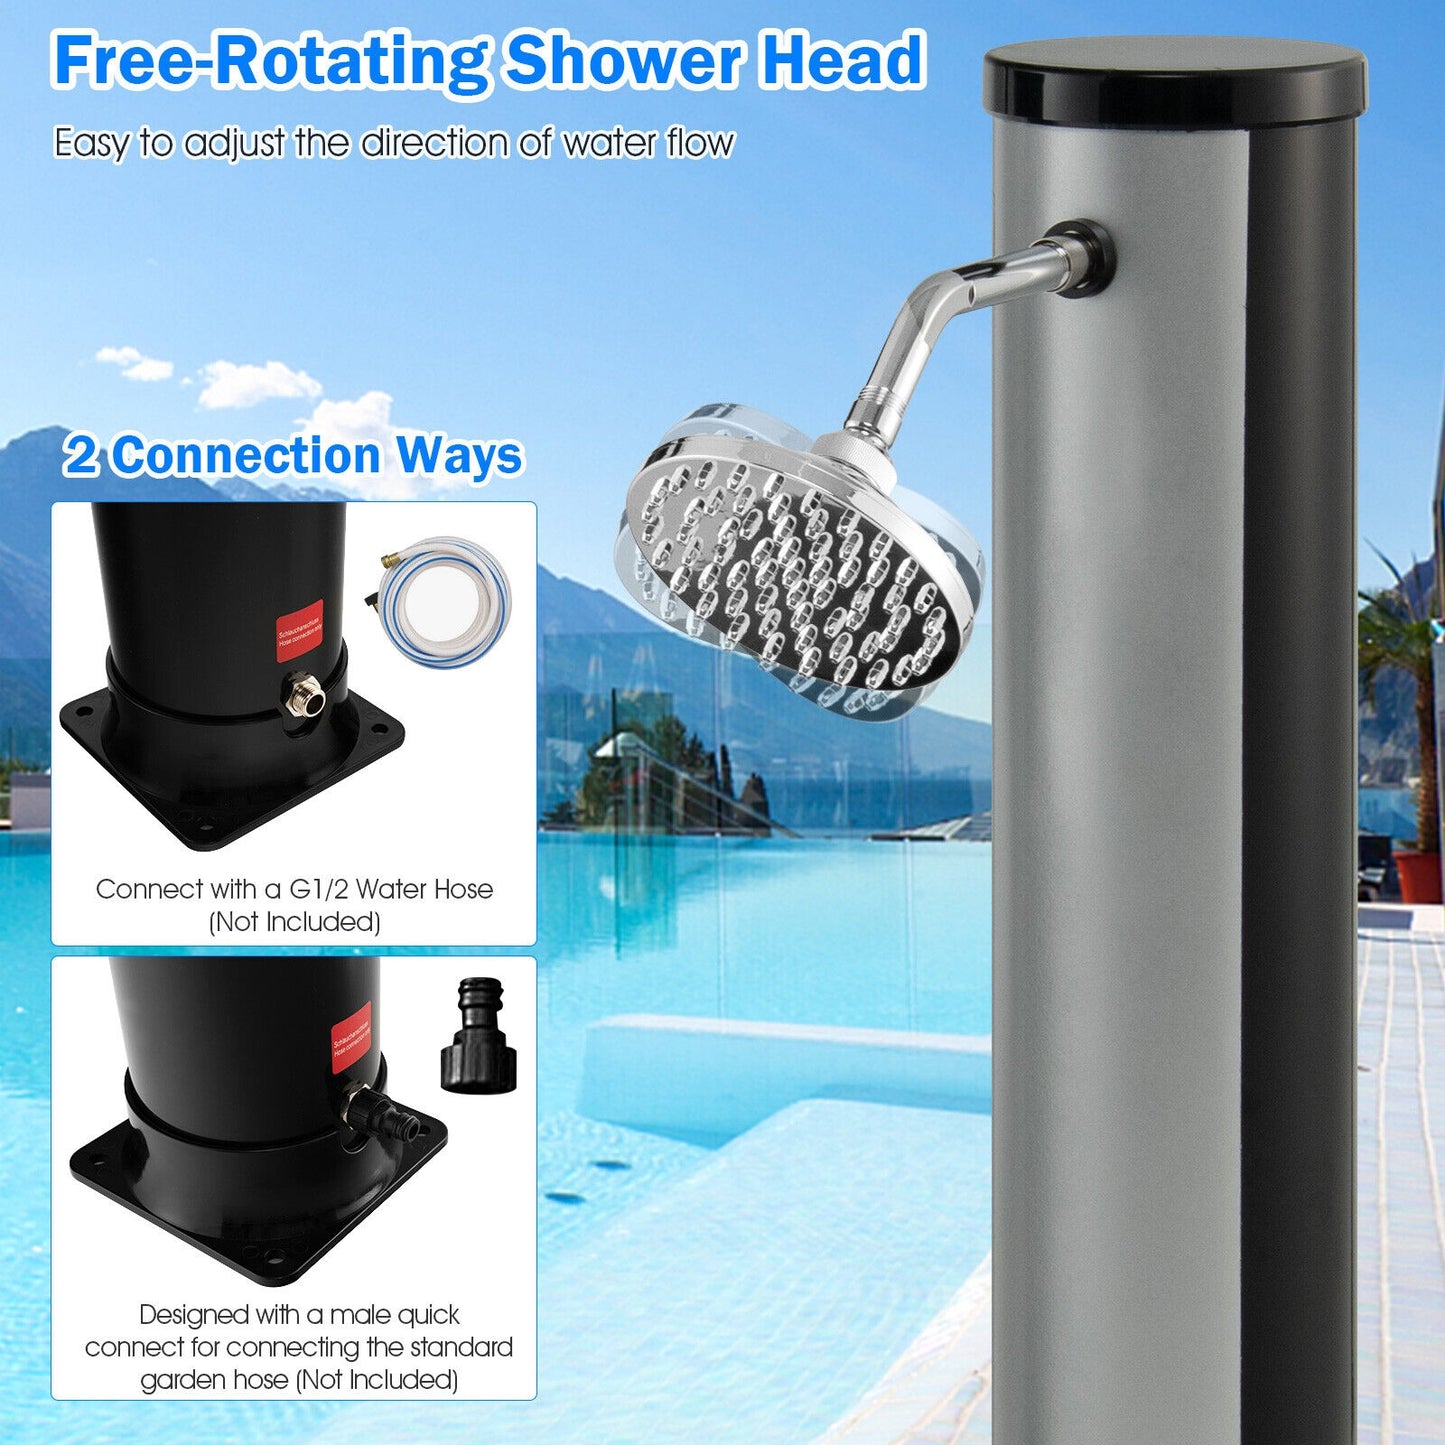 7.2 Feet Solar-Heated Outdoor Shower with Free-Rotating Shower Head-Silver